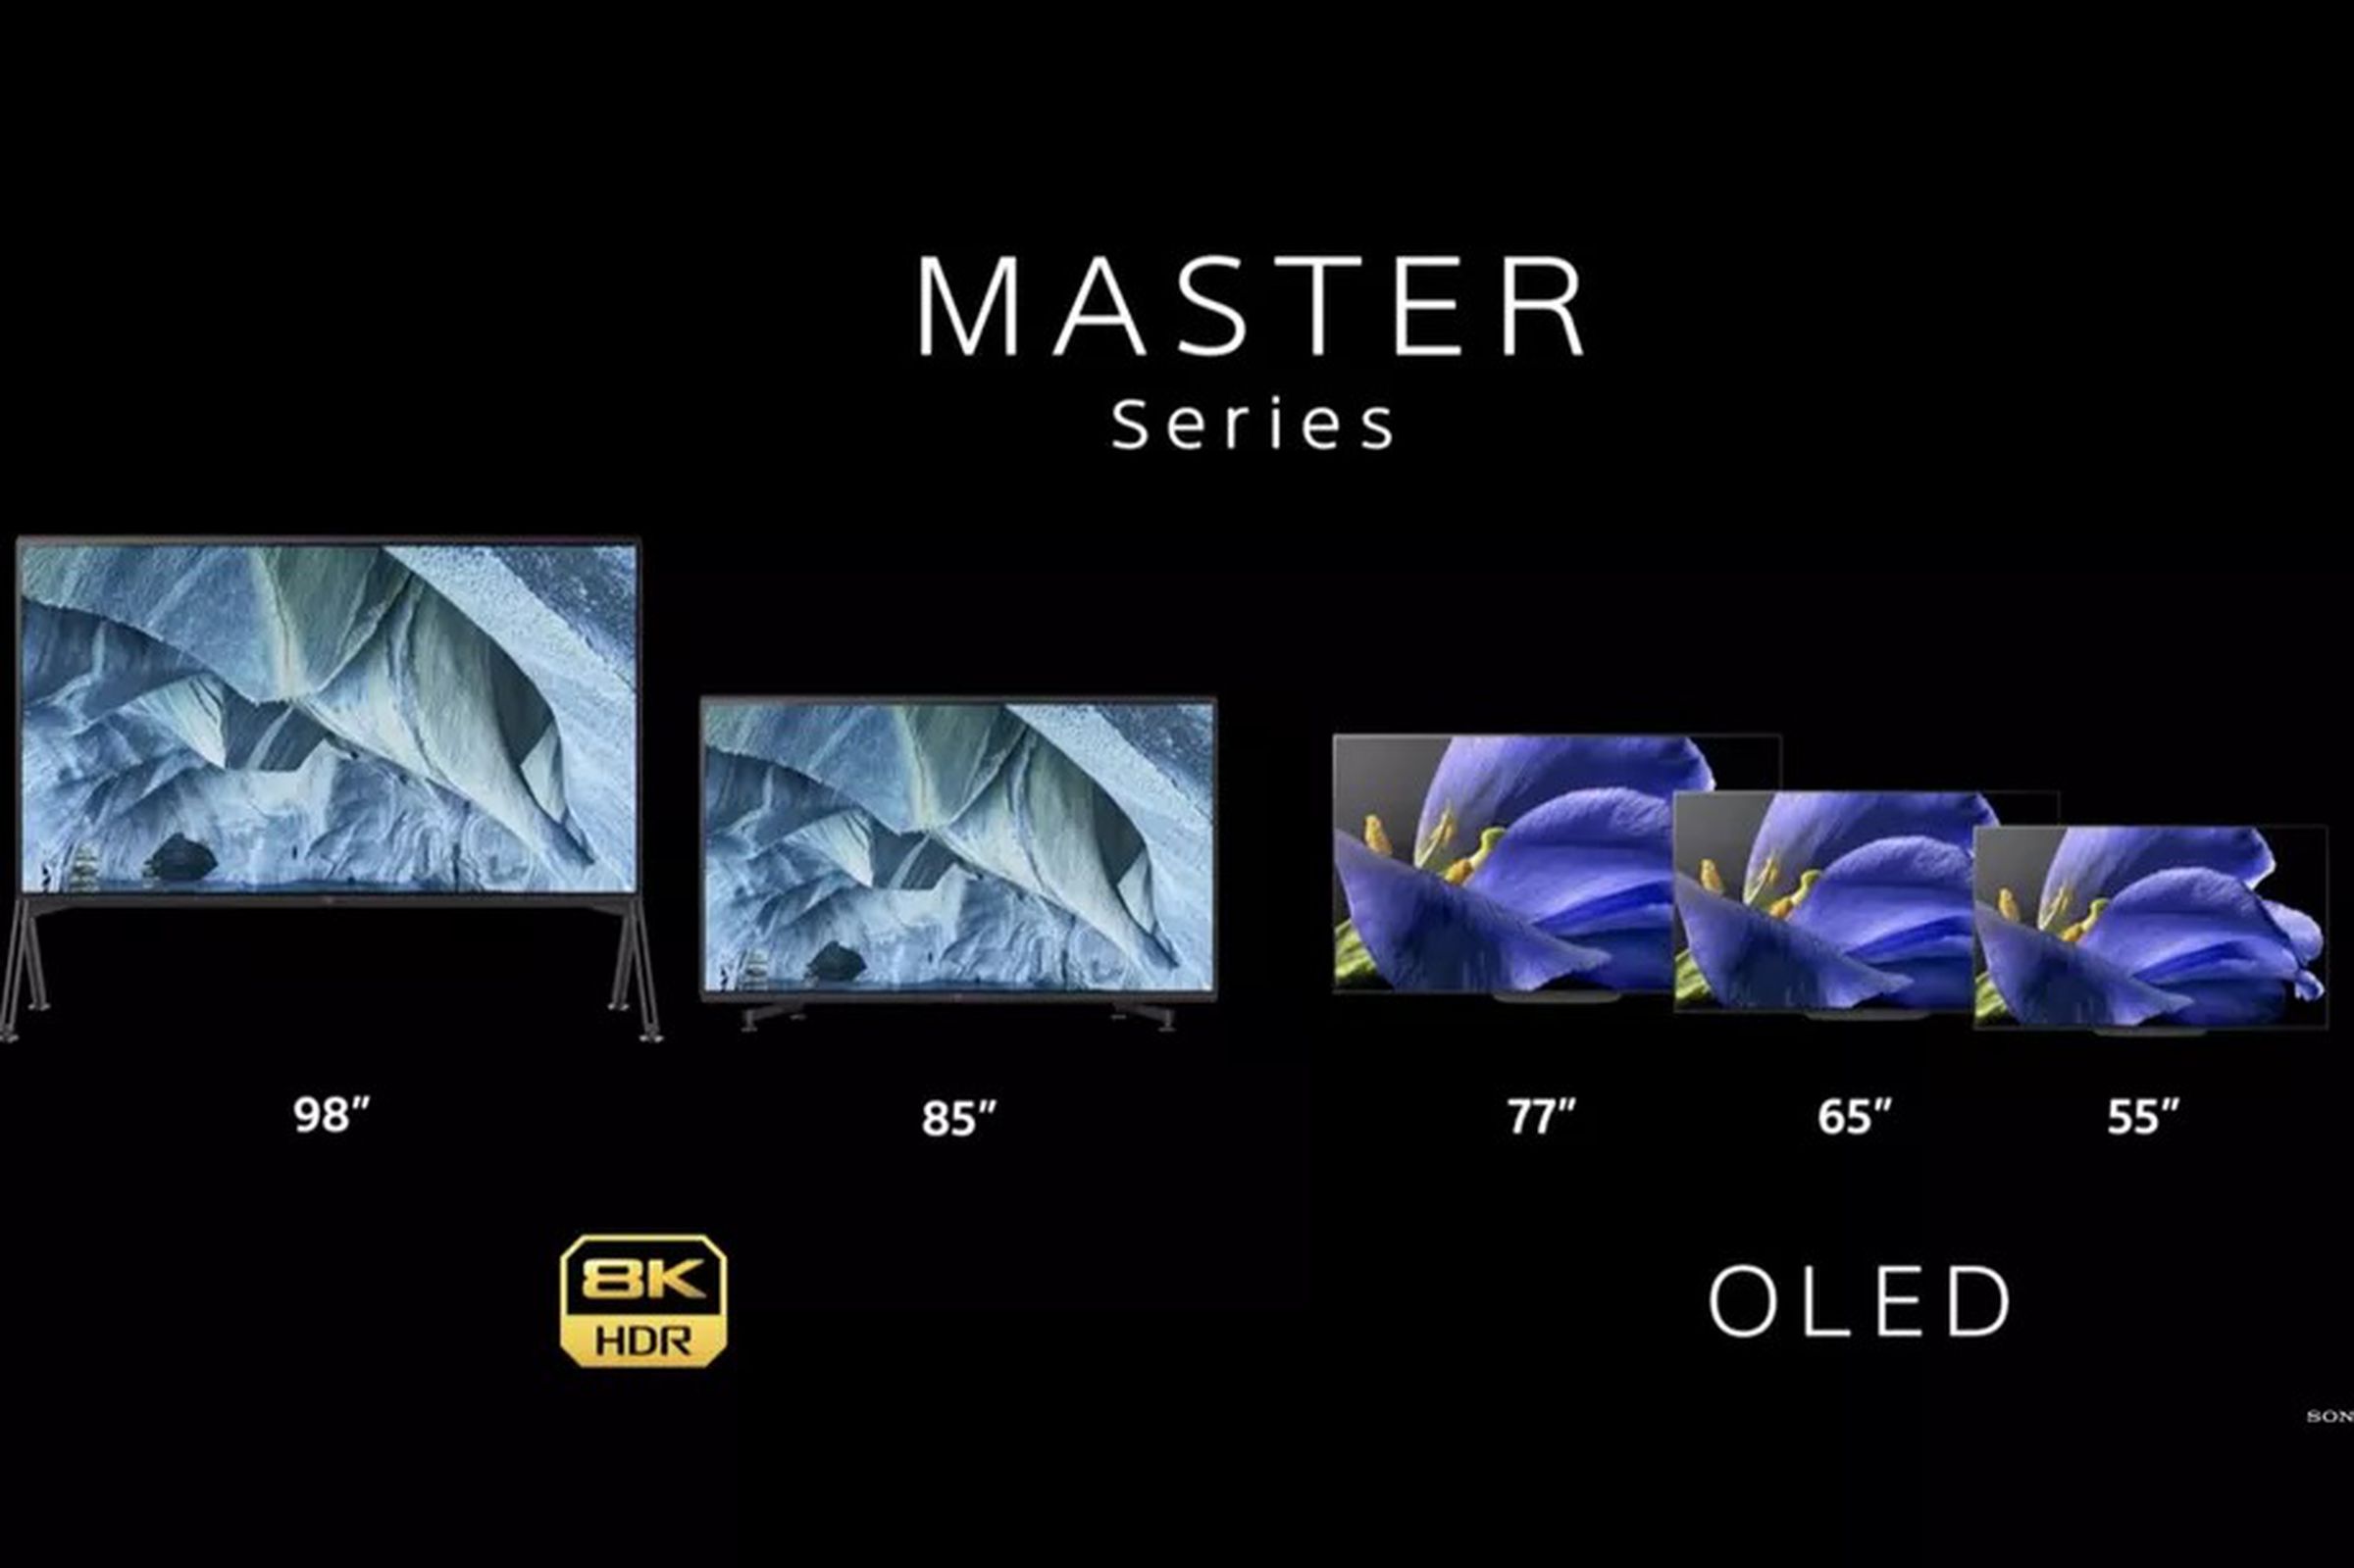 Sony’s LCD lineup now goes up to 98 inches. But if you want an OLED, you’ll be stuck with “only” 75 inches.